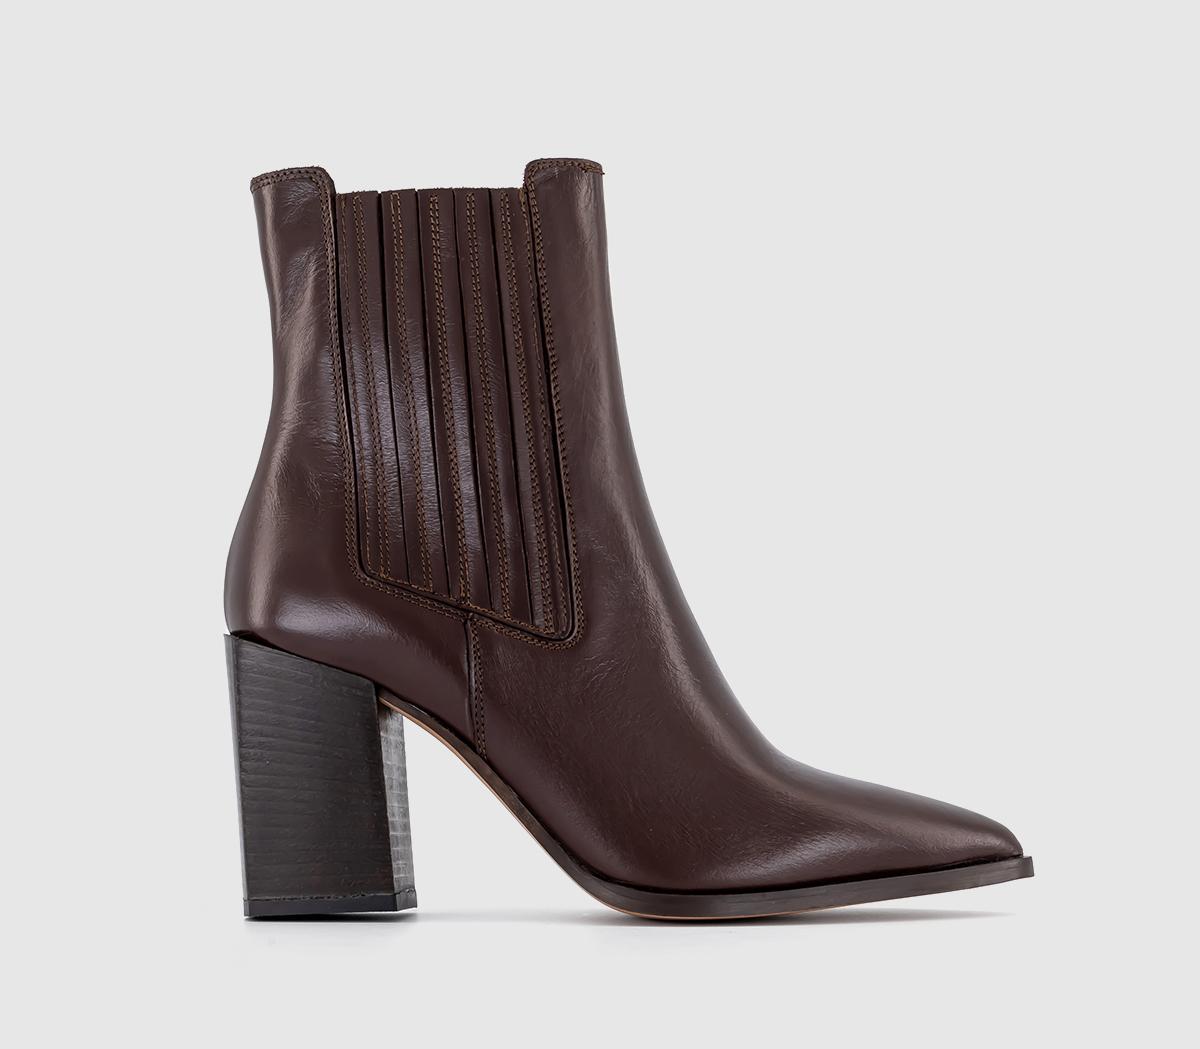 OFFICEAndine Covered Chelsea Western BootsBrown Leather